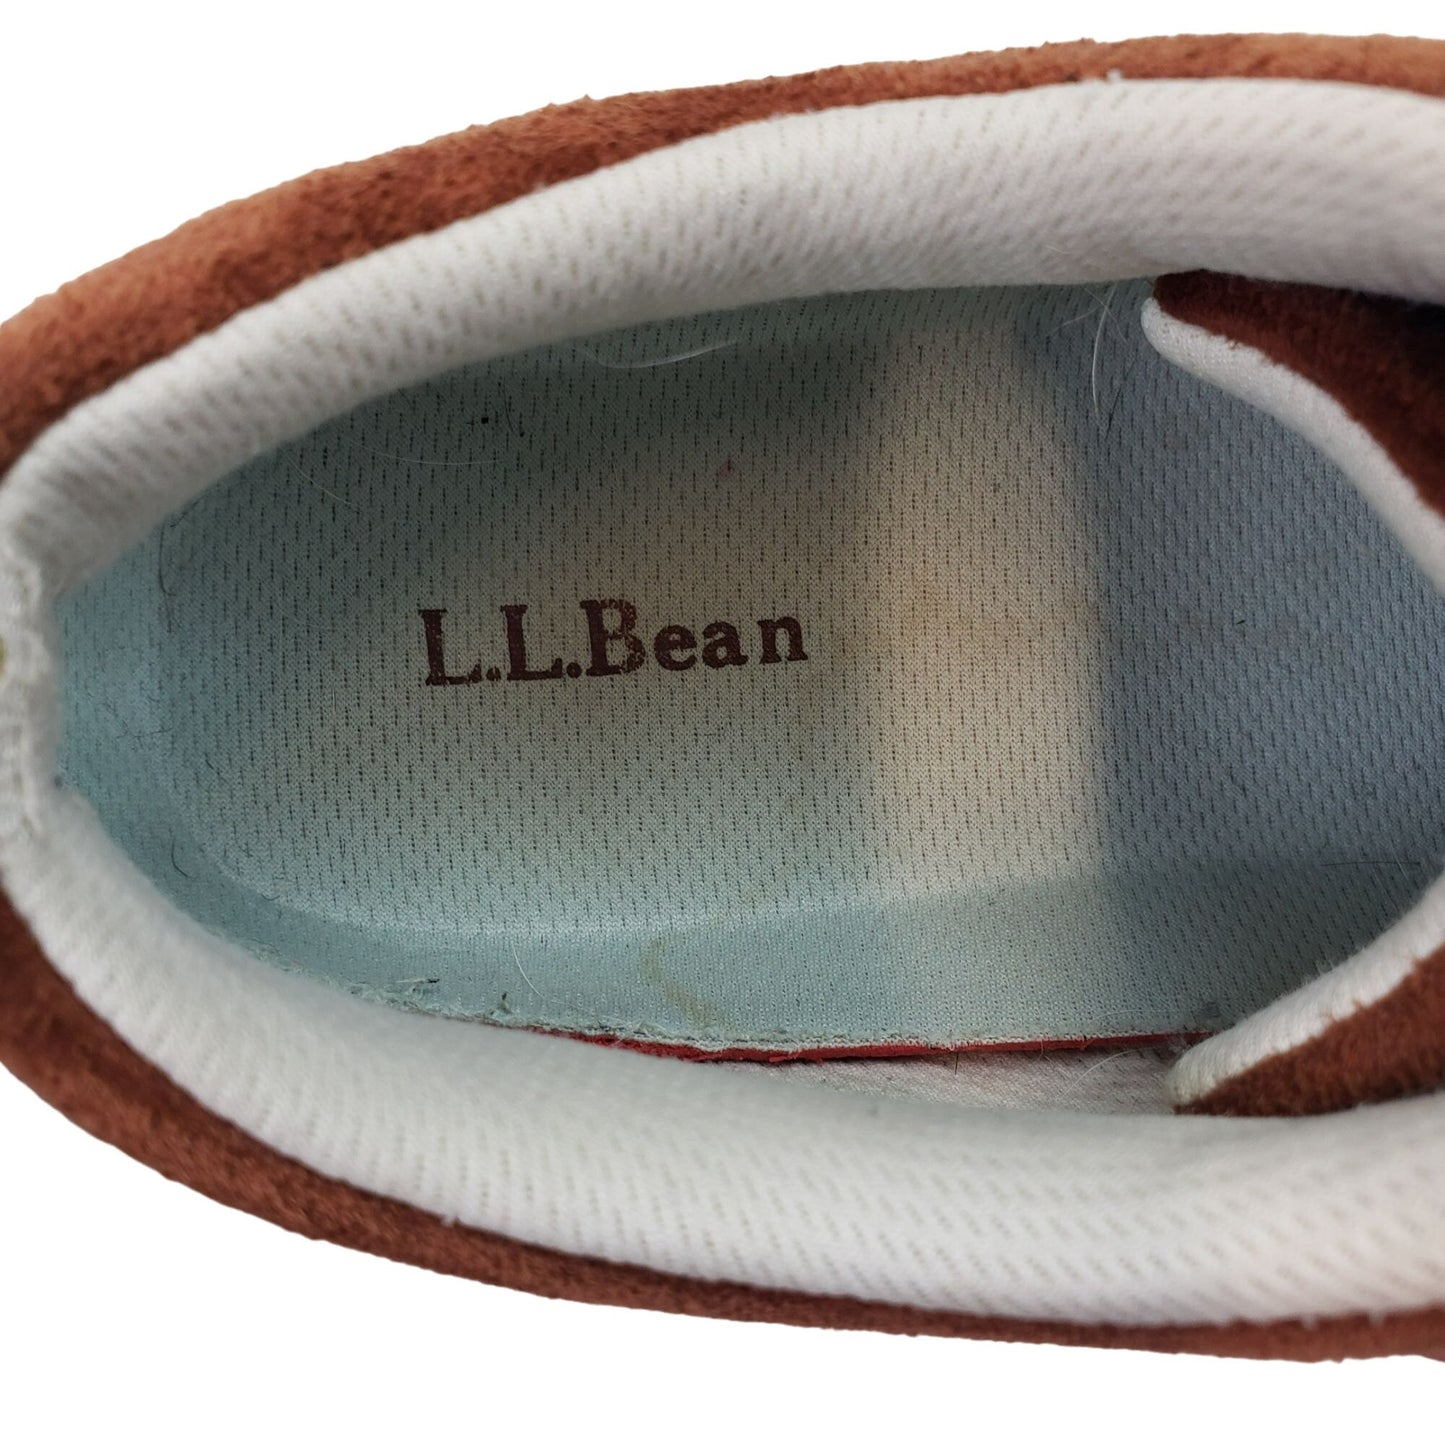 LL Bean BeanSport Casual Lace Up Suede Leather Shoes Size 9.5